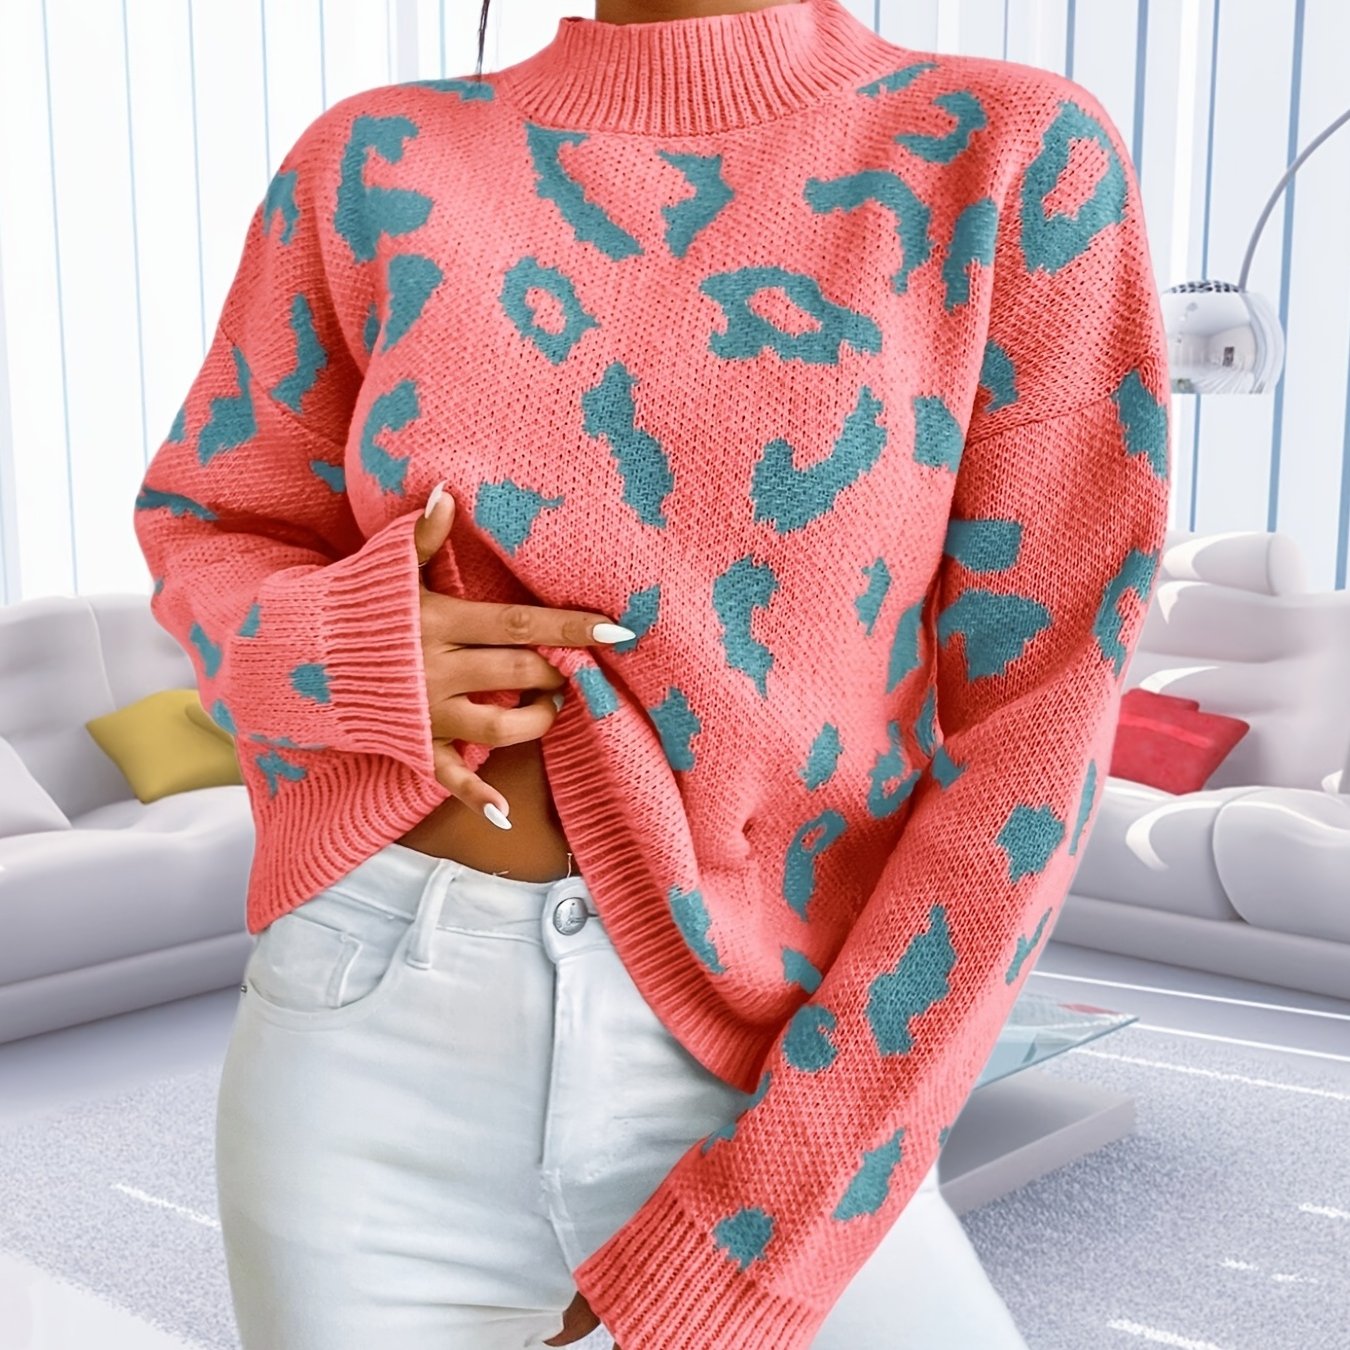 Vzyzv Graphic Pattern Mock Neck Pullover Sweater, Casual Long Sleeve Sweater, Women's Clothing